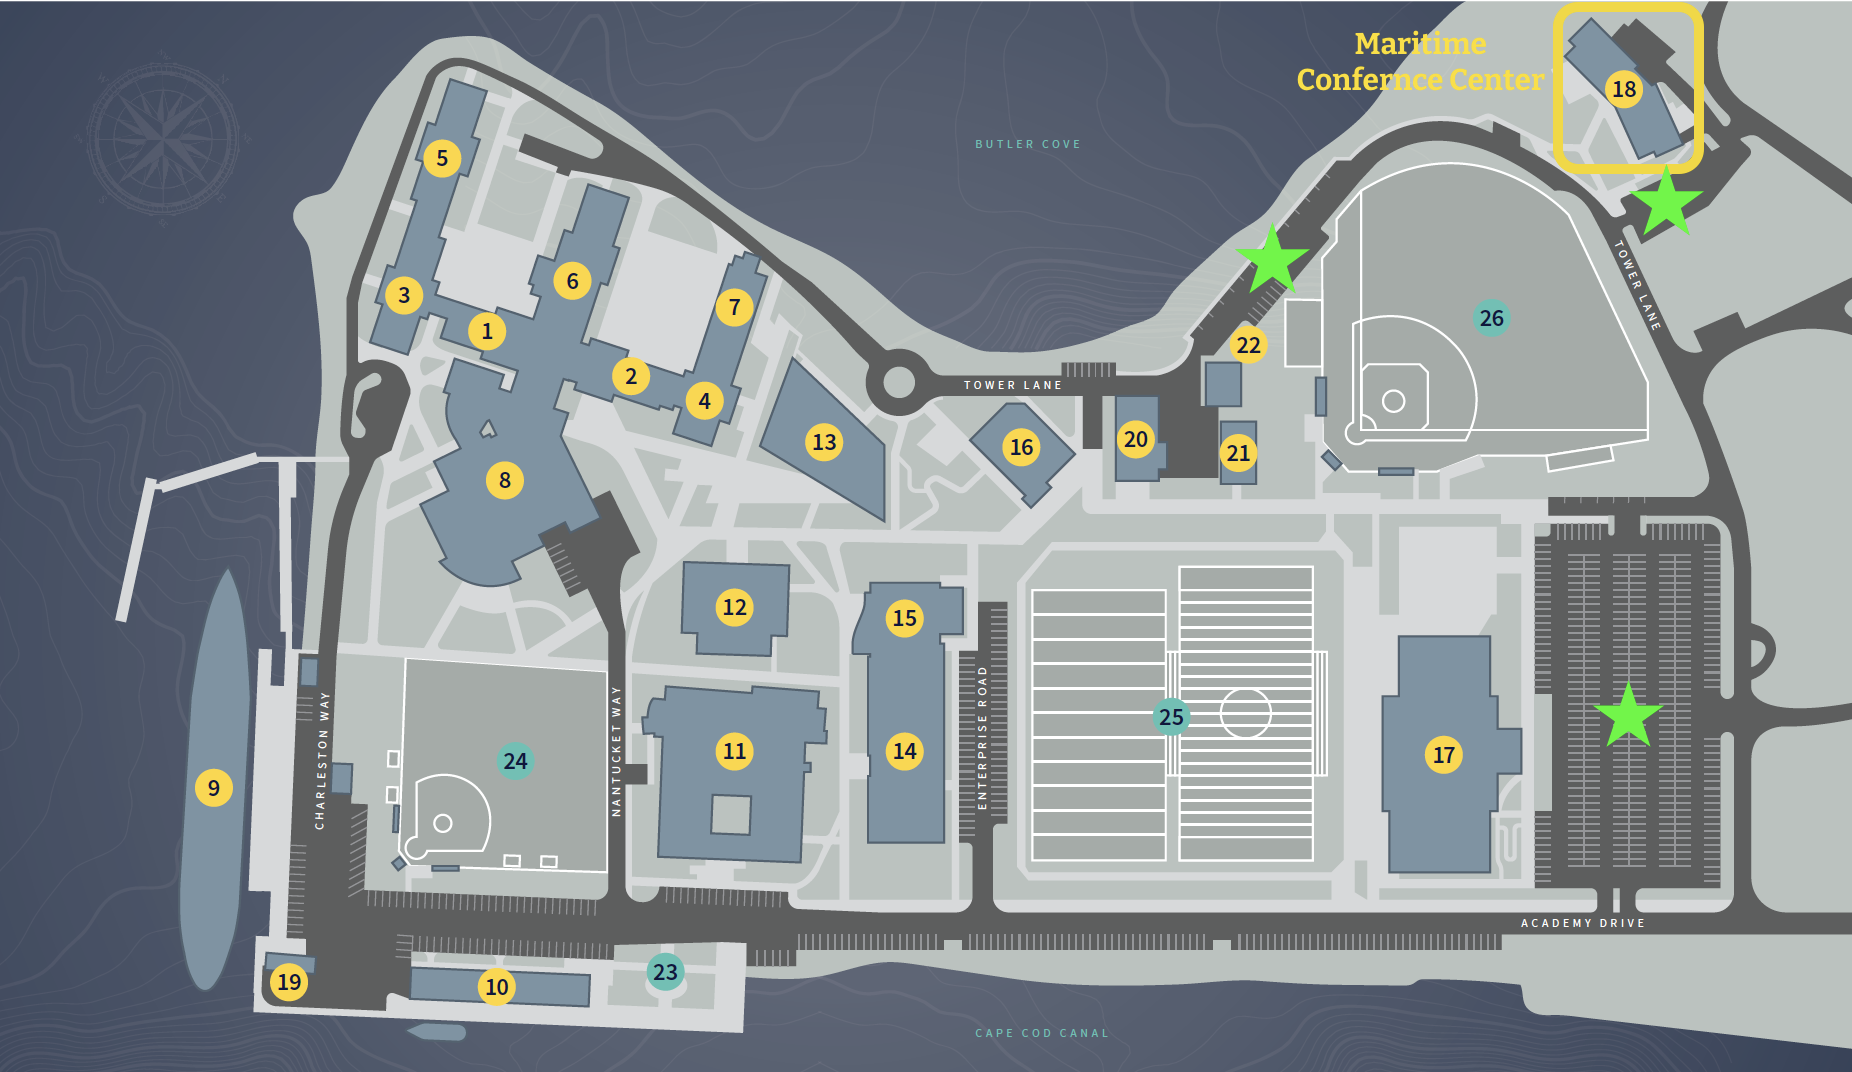 Maritime Conference Center parking map